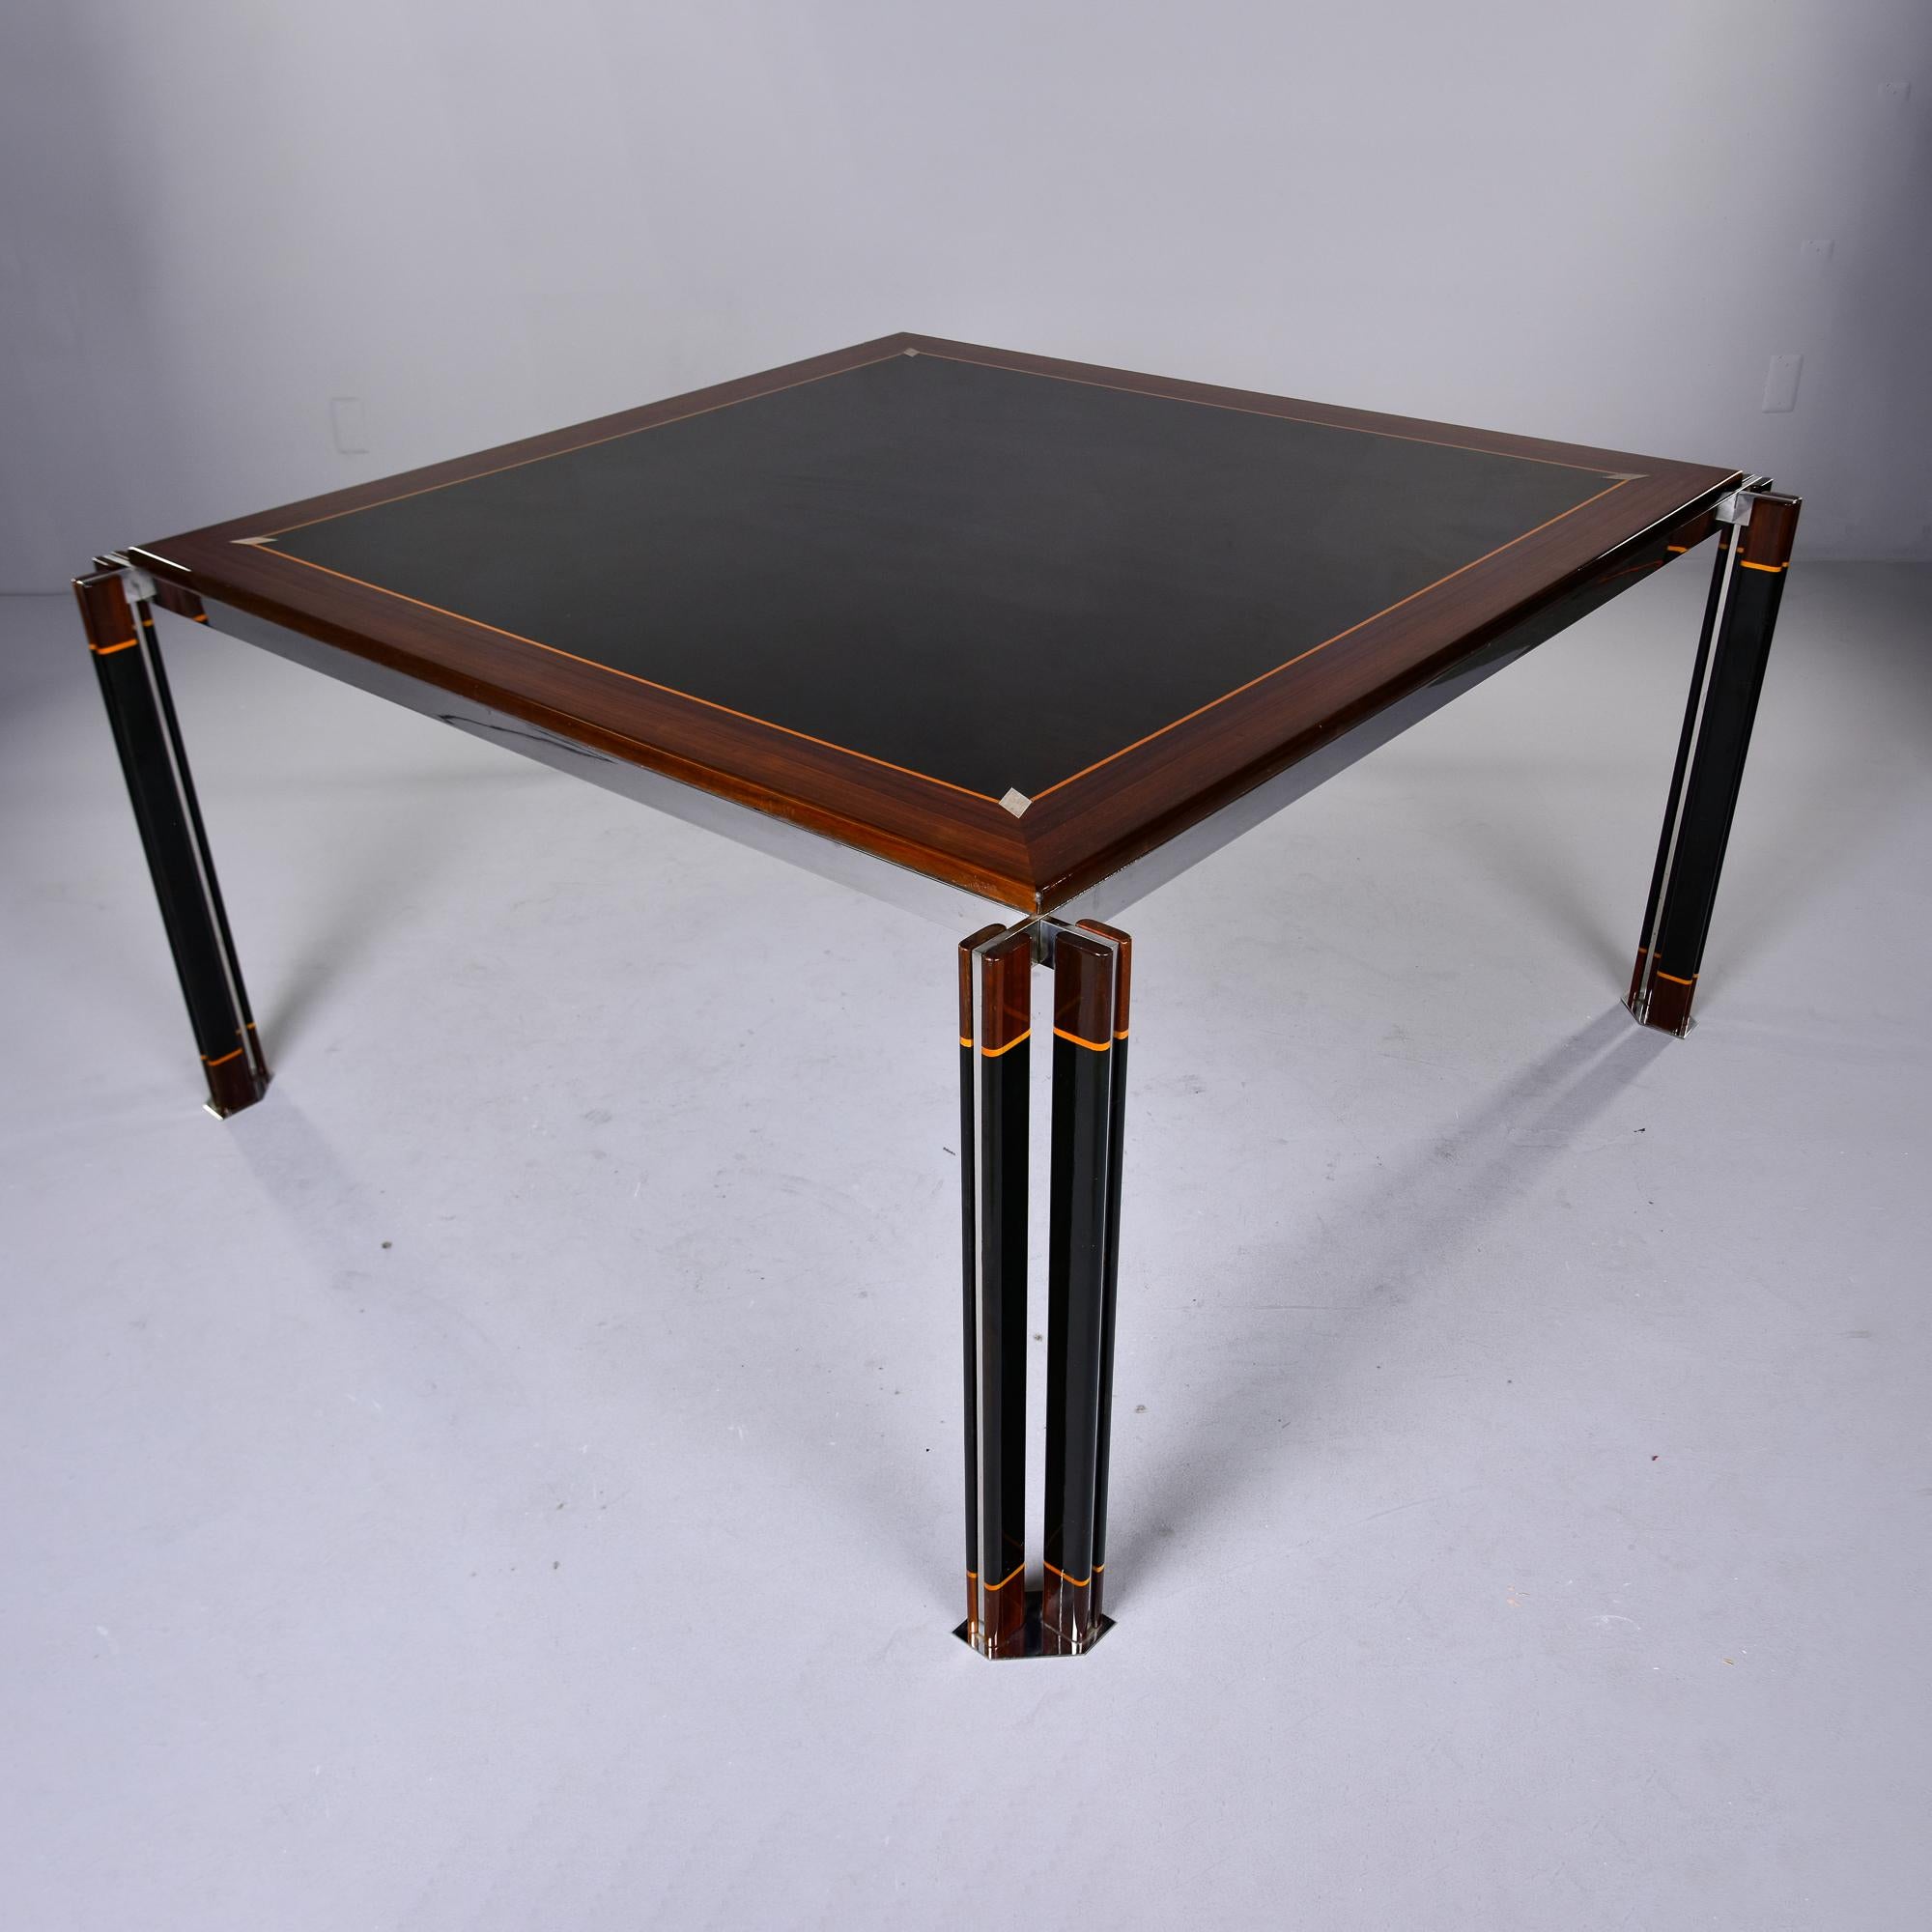 This circa 1970s dining table was designed by Paolo Barracchia and manufactured in Italy by Roman Deco. The table is 60.75” square and consists of padouk with an ebony center and contrasting geometric maple and bone inlays. The table top has a band